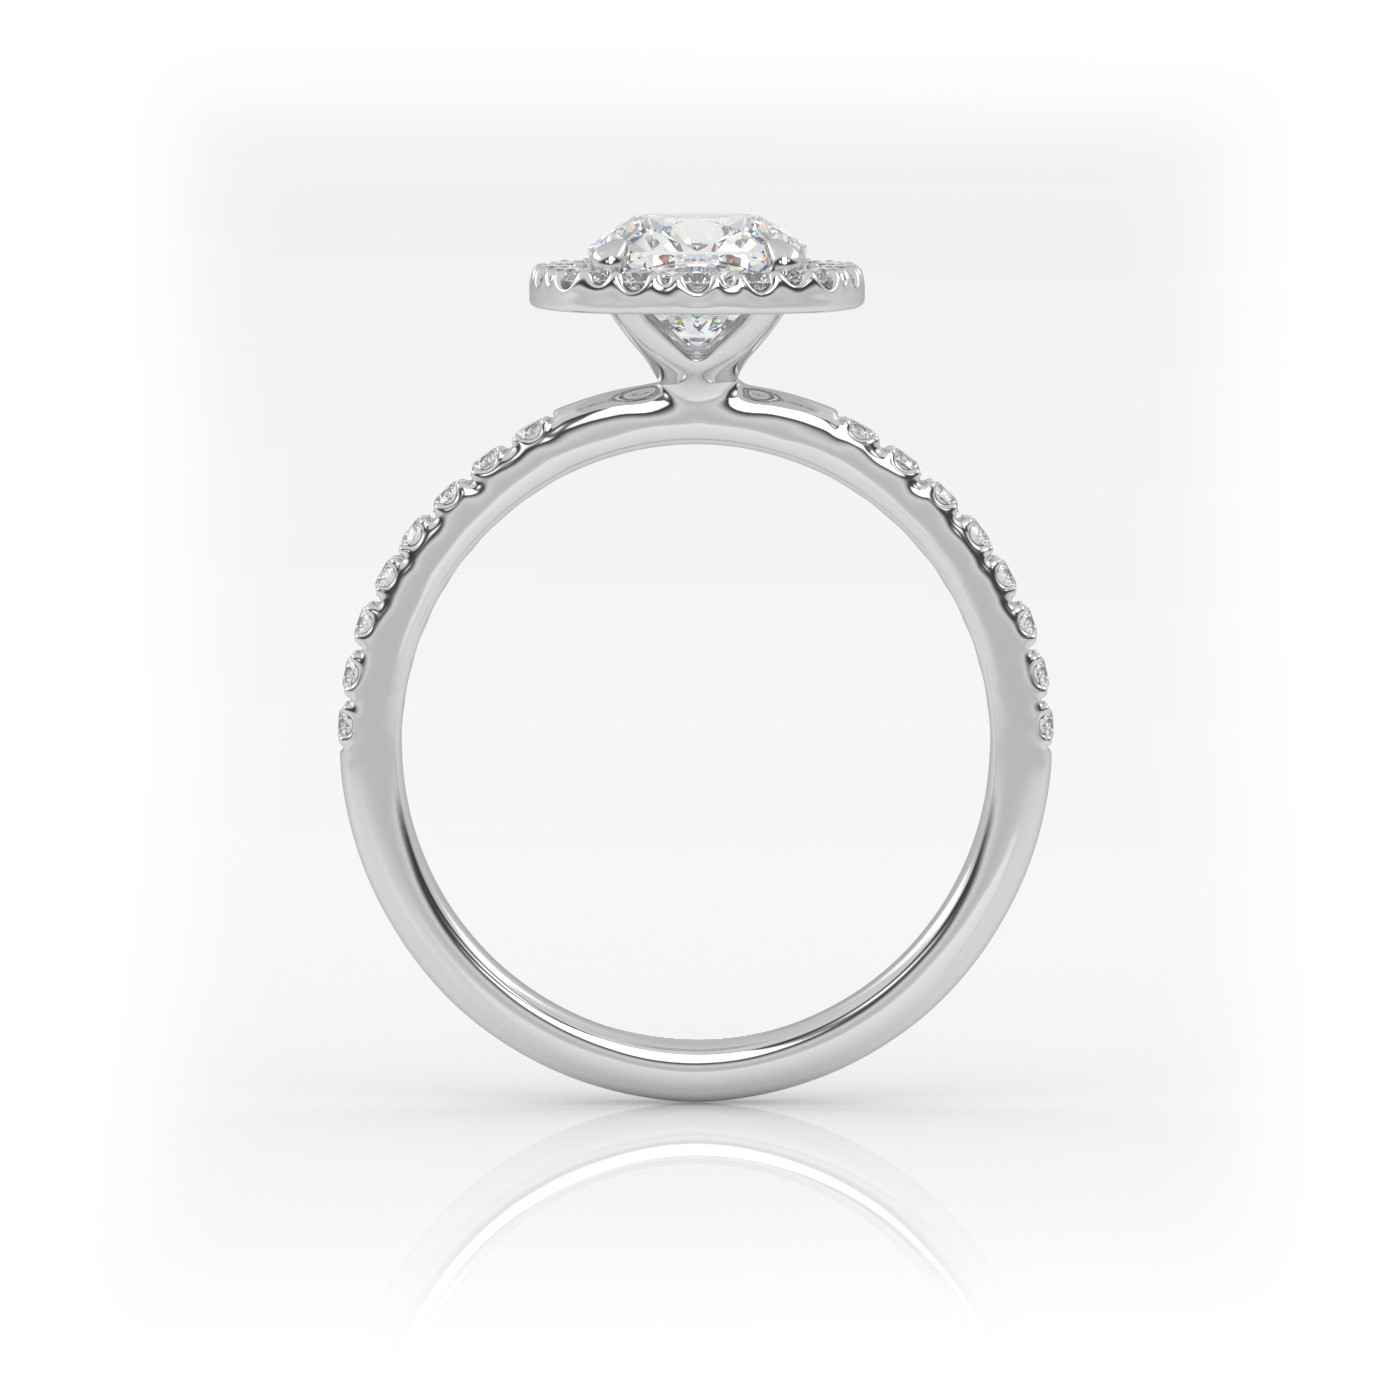 18K WHITE GOLD Cushion Diamond Engagement Ring With Pave and Halo Style